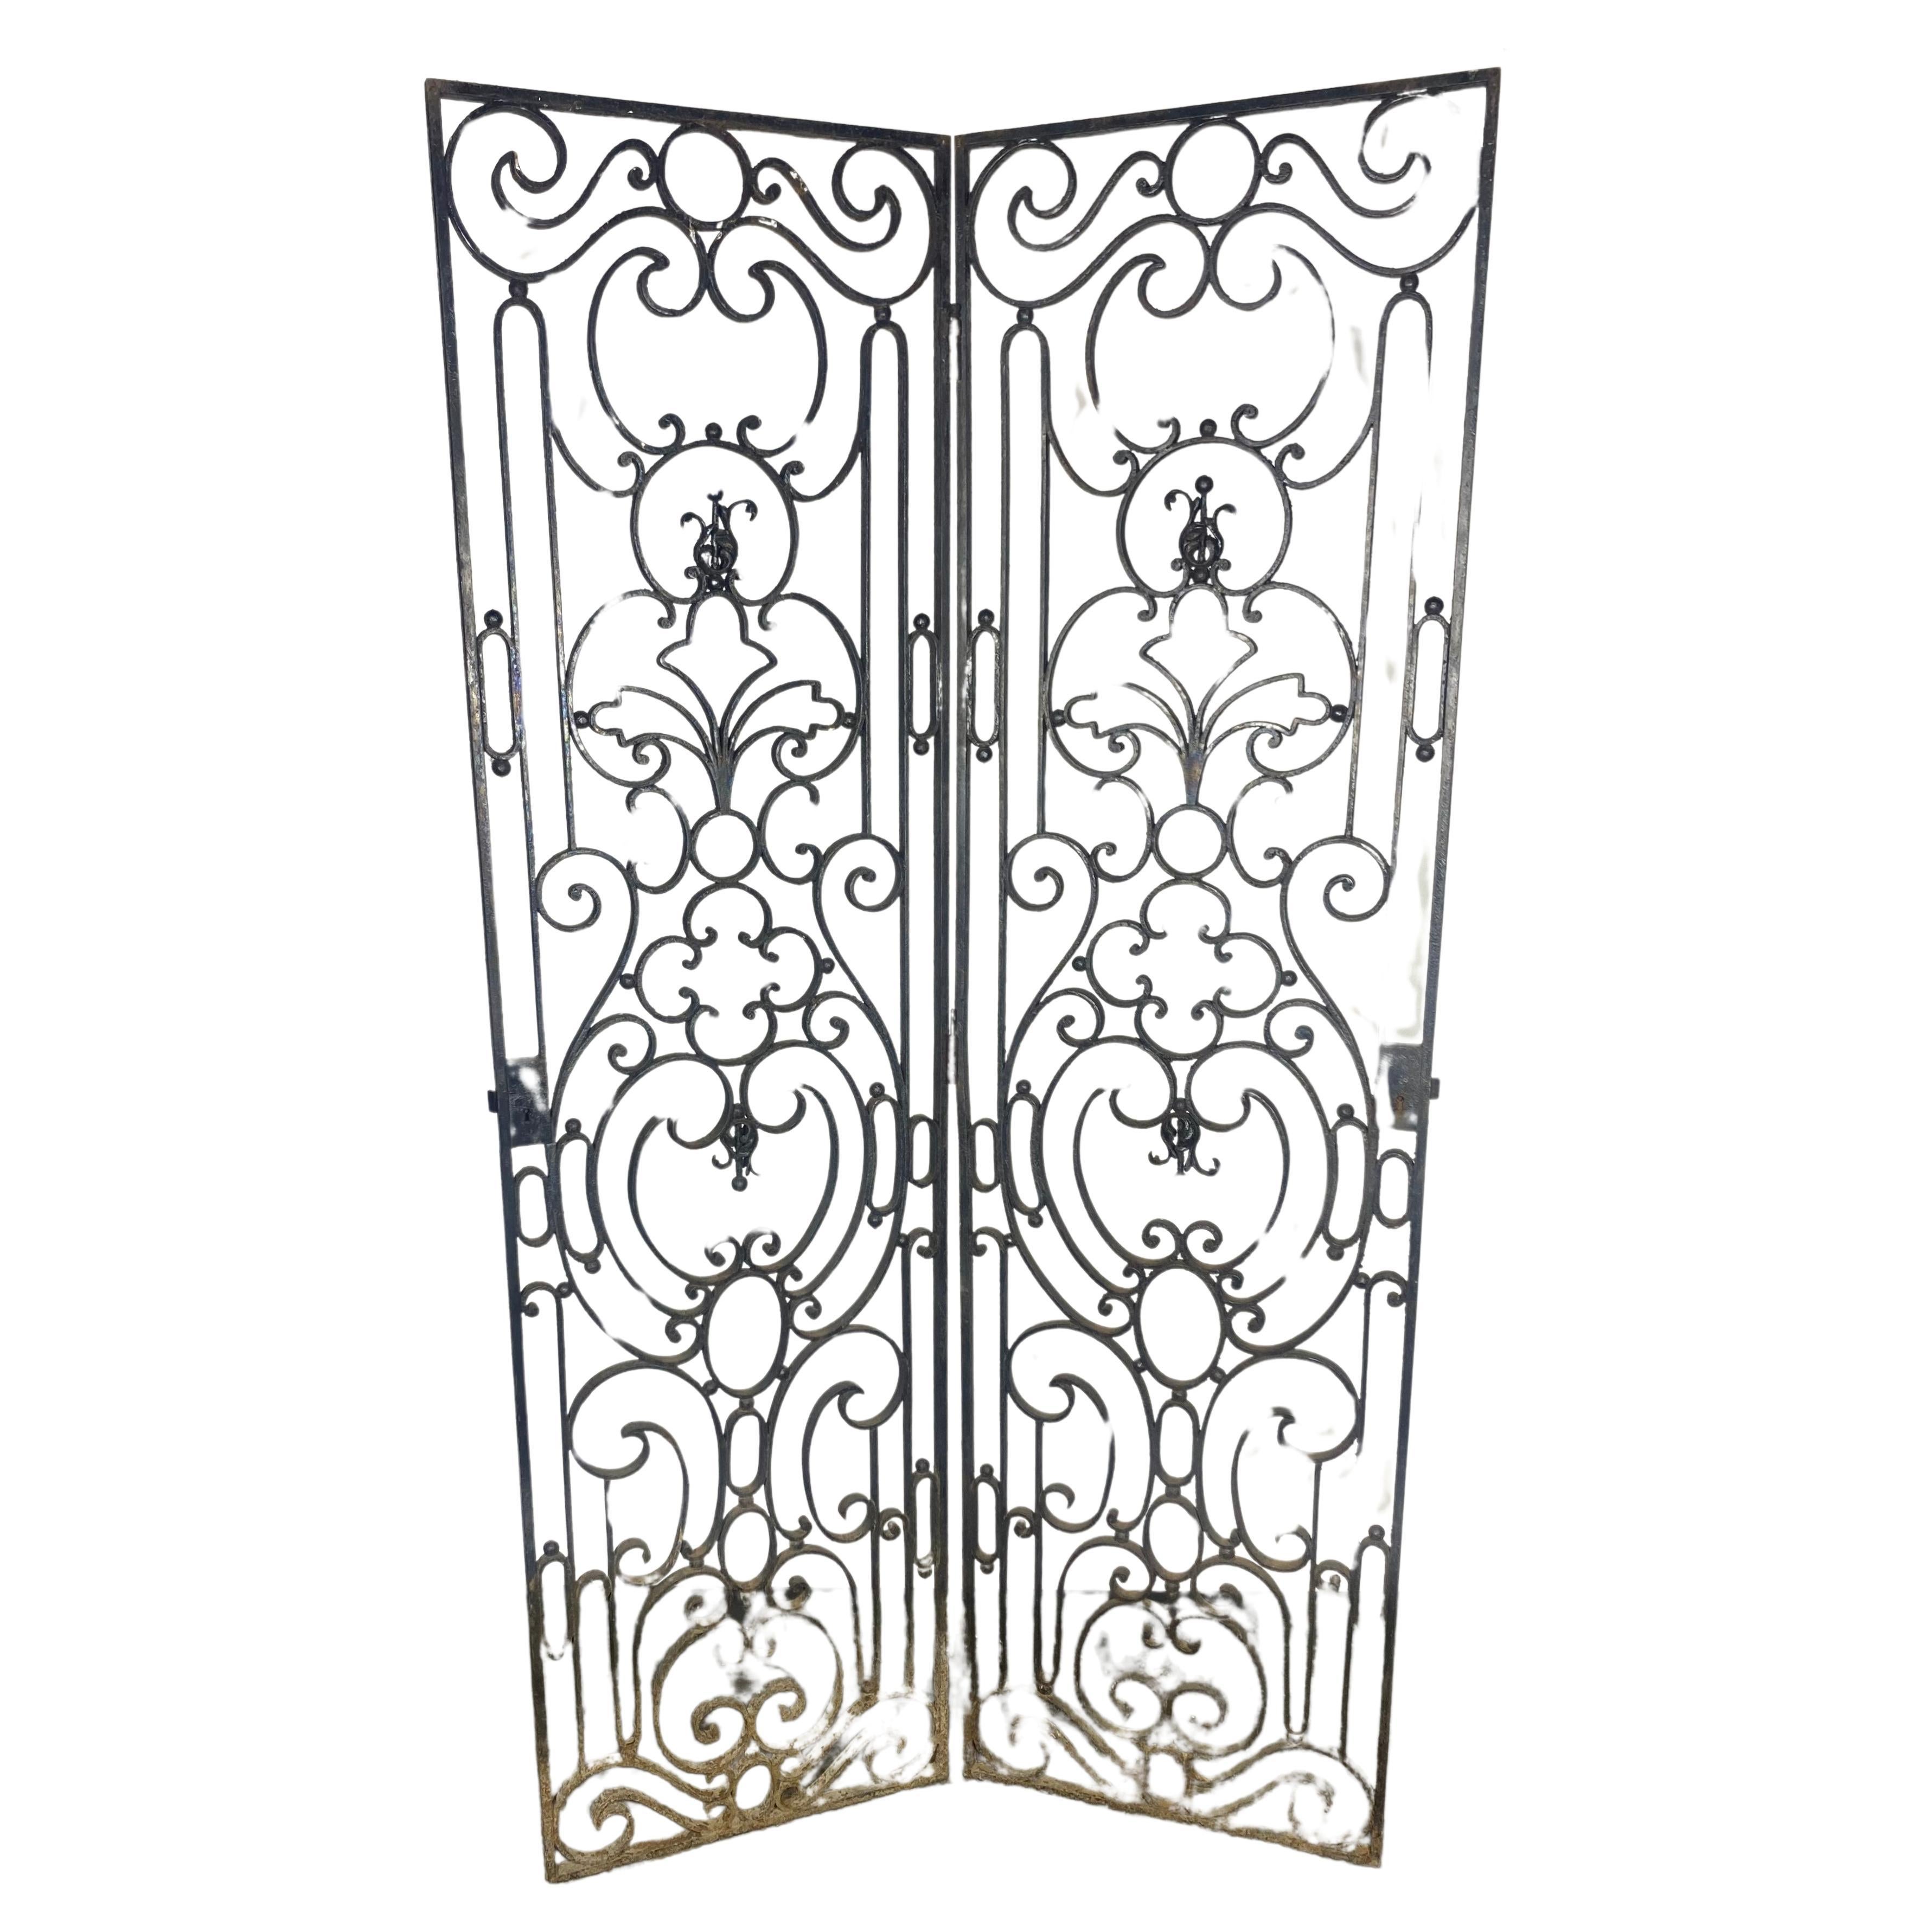 Lovely Hand Forged Wrought Iron Filigree Screen Room Divider, Garden element